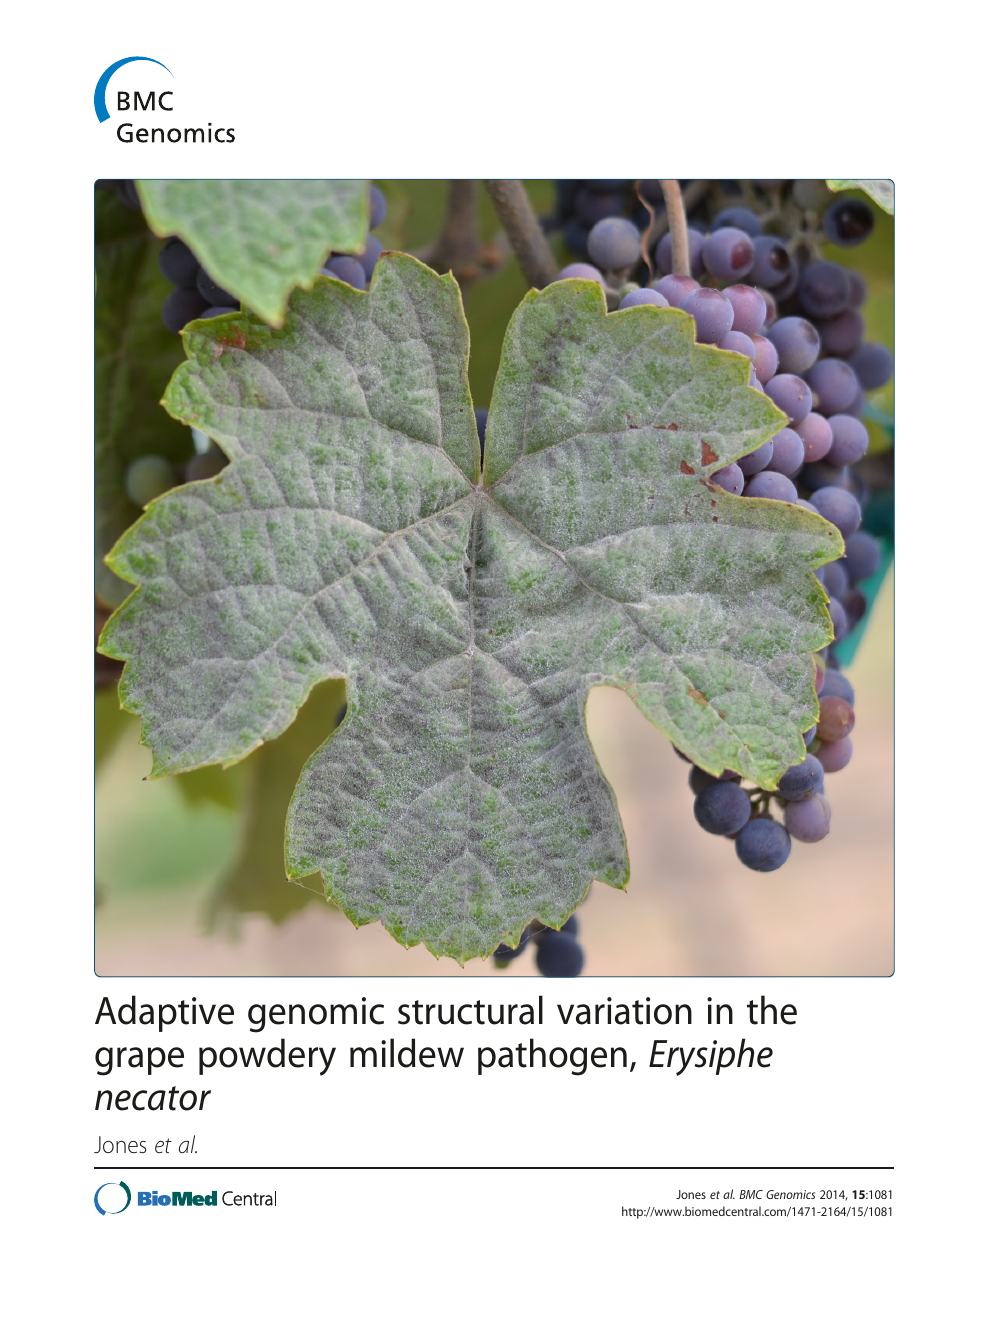 Adaptive Genomic Structural Variation In The Grape Powdery Mildew Pathogen Erysiphe Necator Topic Of Research Paper In Biological Sciences Download Scholarly Article Pdf And Read For Free On Cyberleninka Open Science